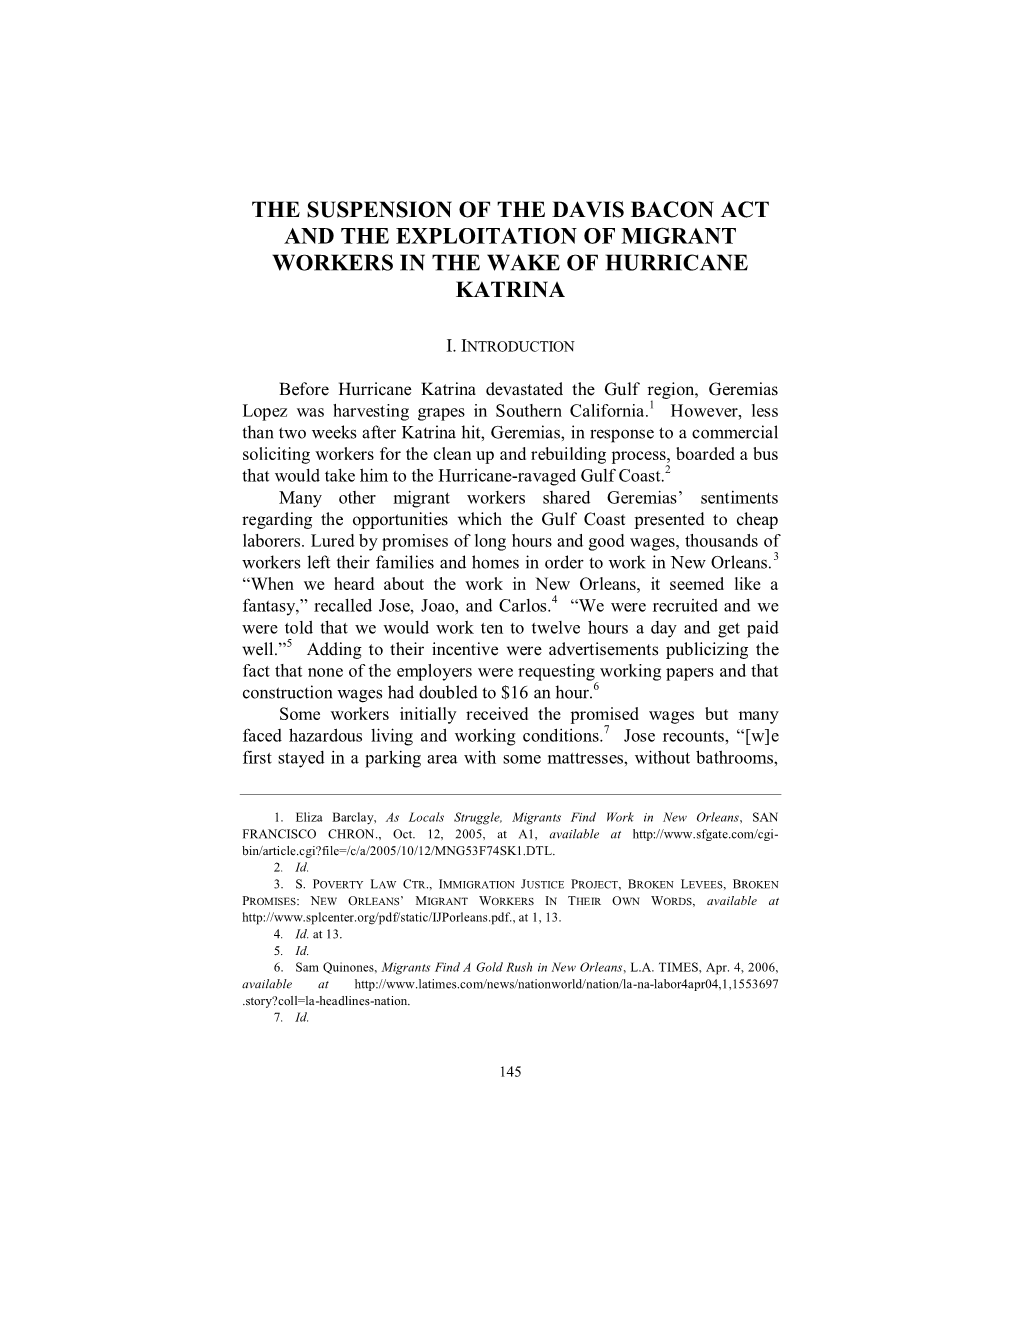 The Suspension of the Davis Bacon Act and the Exploitation of Migrant Workers in the Wake of Hurricane Katrina